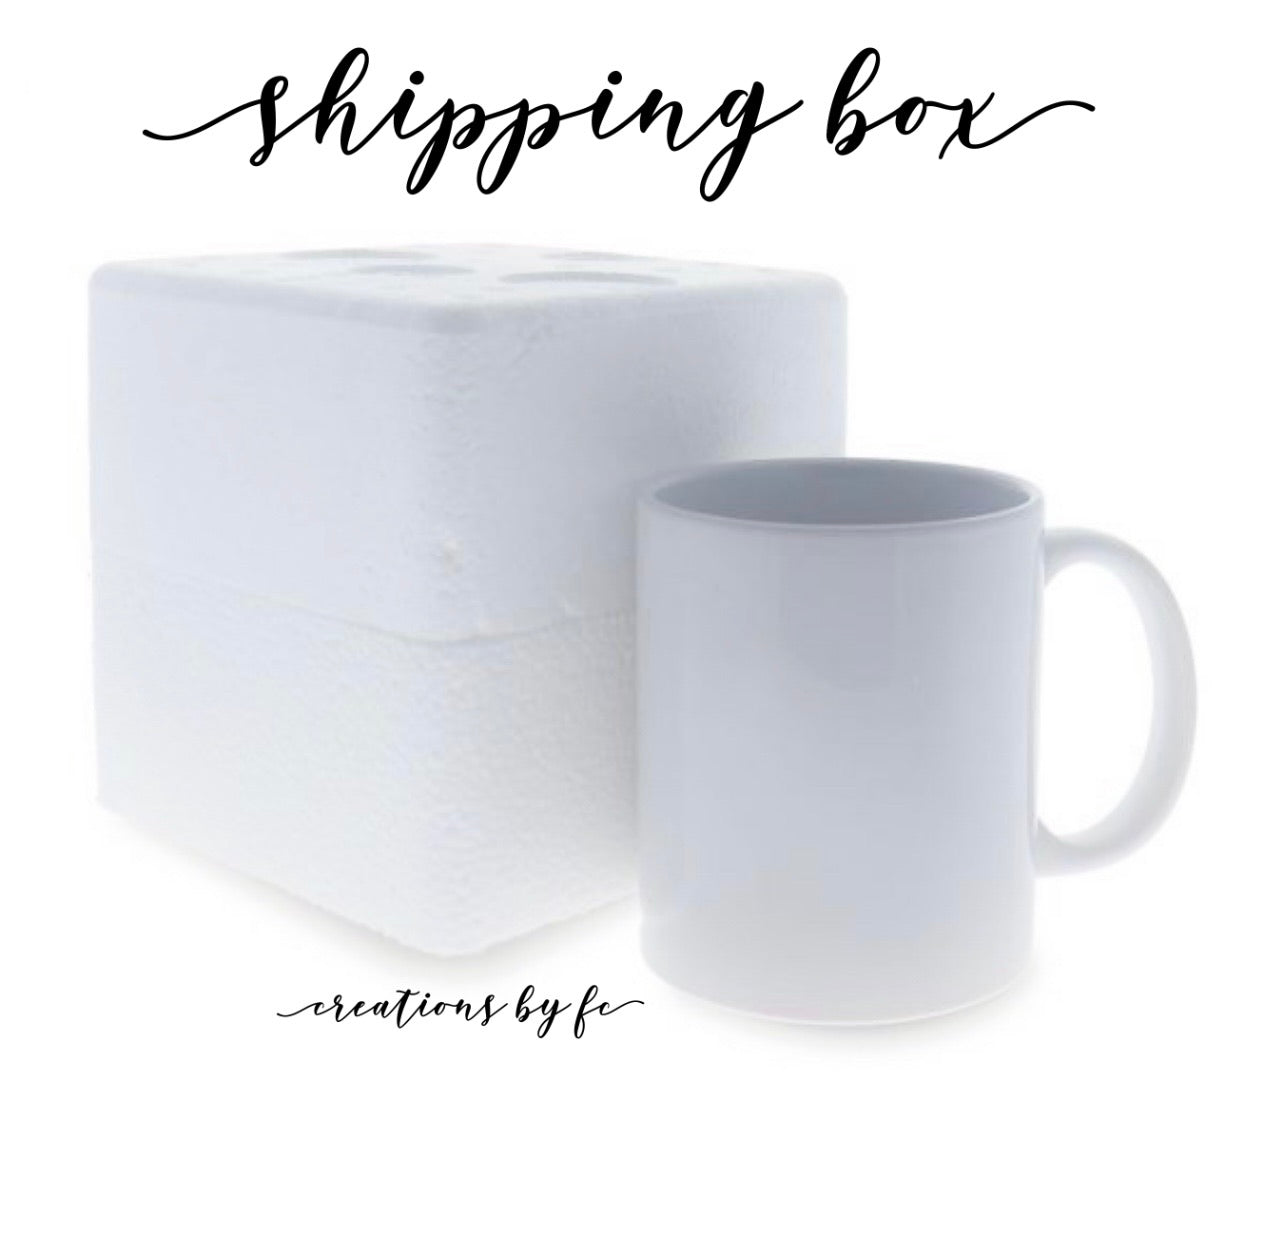 I Don’t Want to be Judgy Mug | 11 oz or 15 oz - Bella Lia Boutique